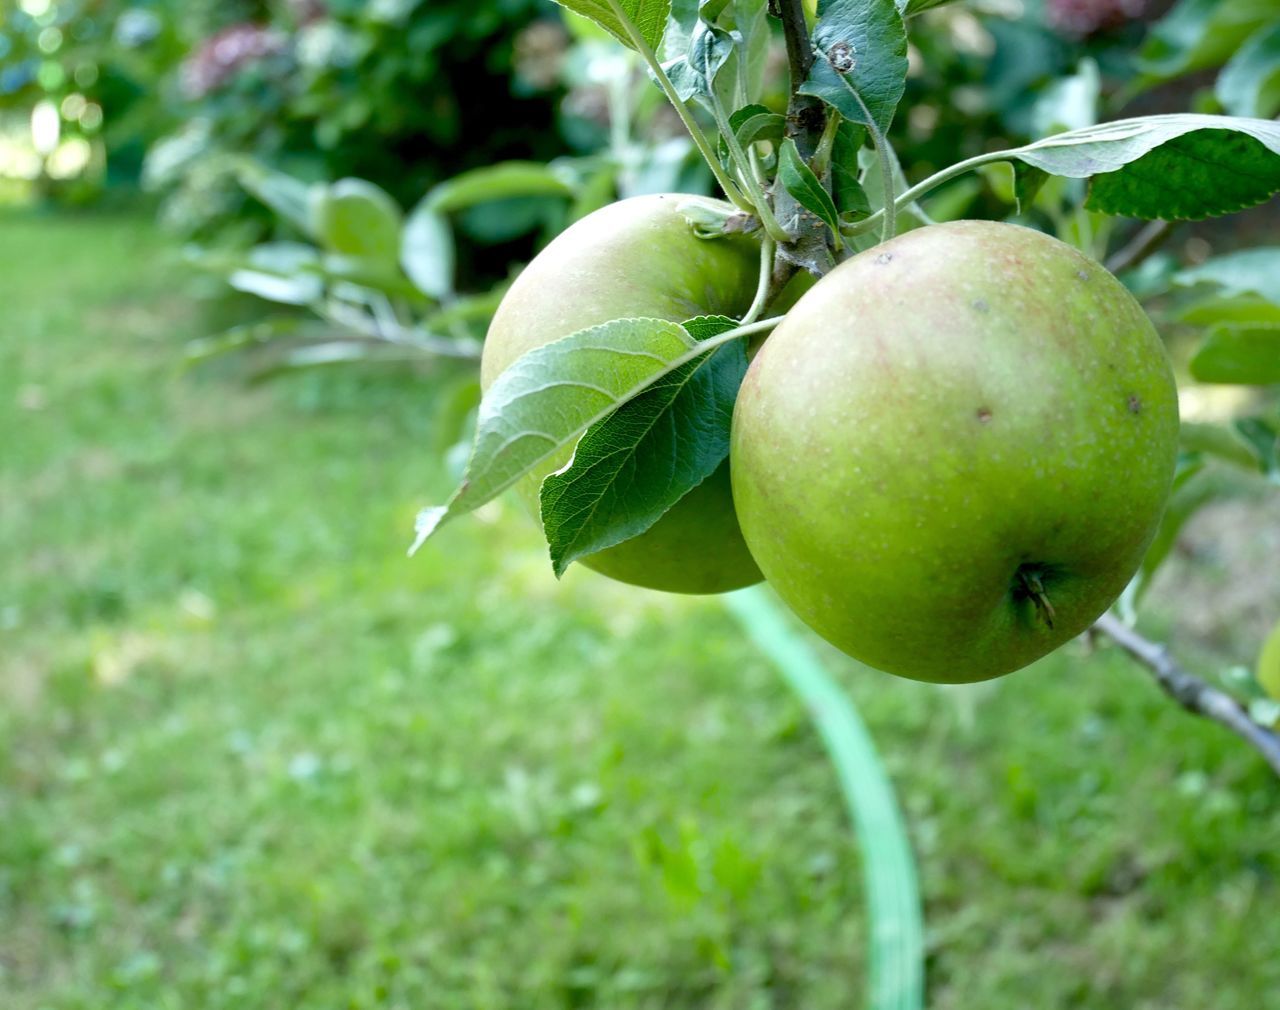 CLOSE-UP OF APPLE GROWING ON PLANT